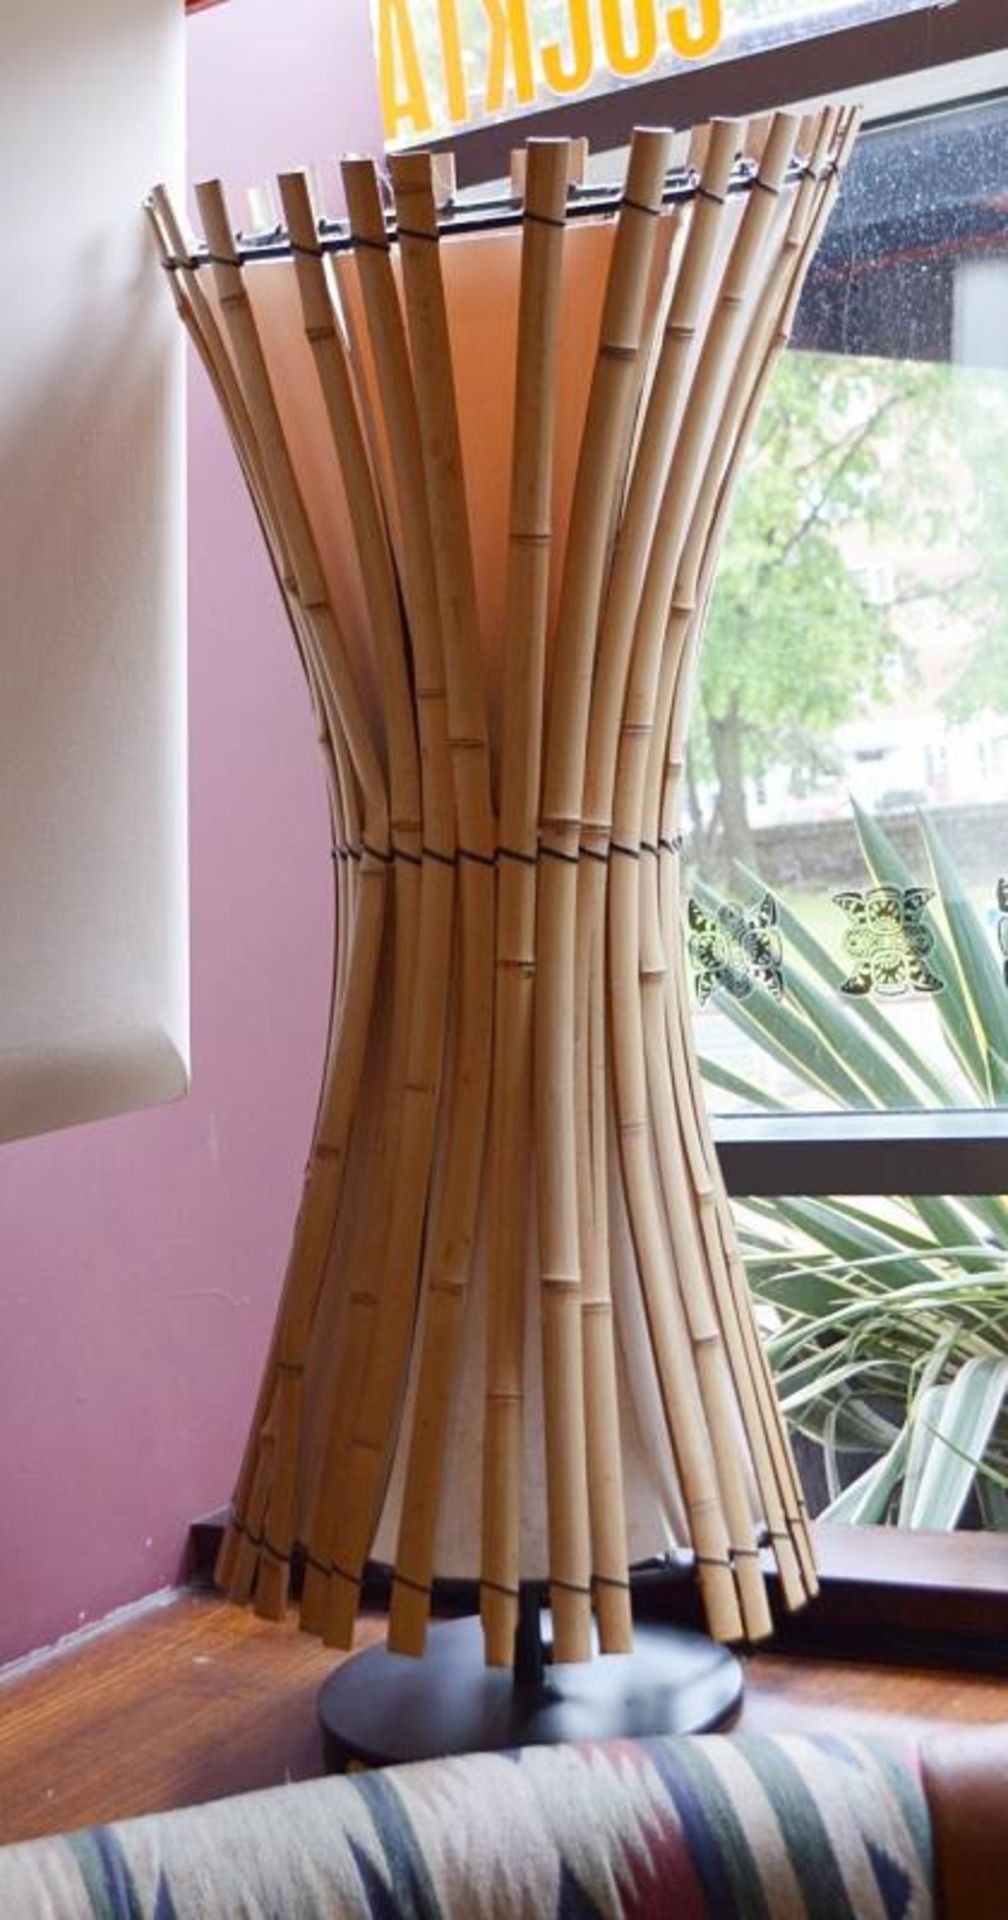 A Pair Of Large Bamboo Cane Tall Freestanding Lamps - Dimensions: Height 92cm, Diameter 40cm - CL367